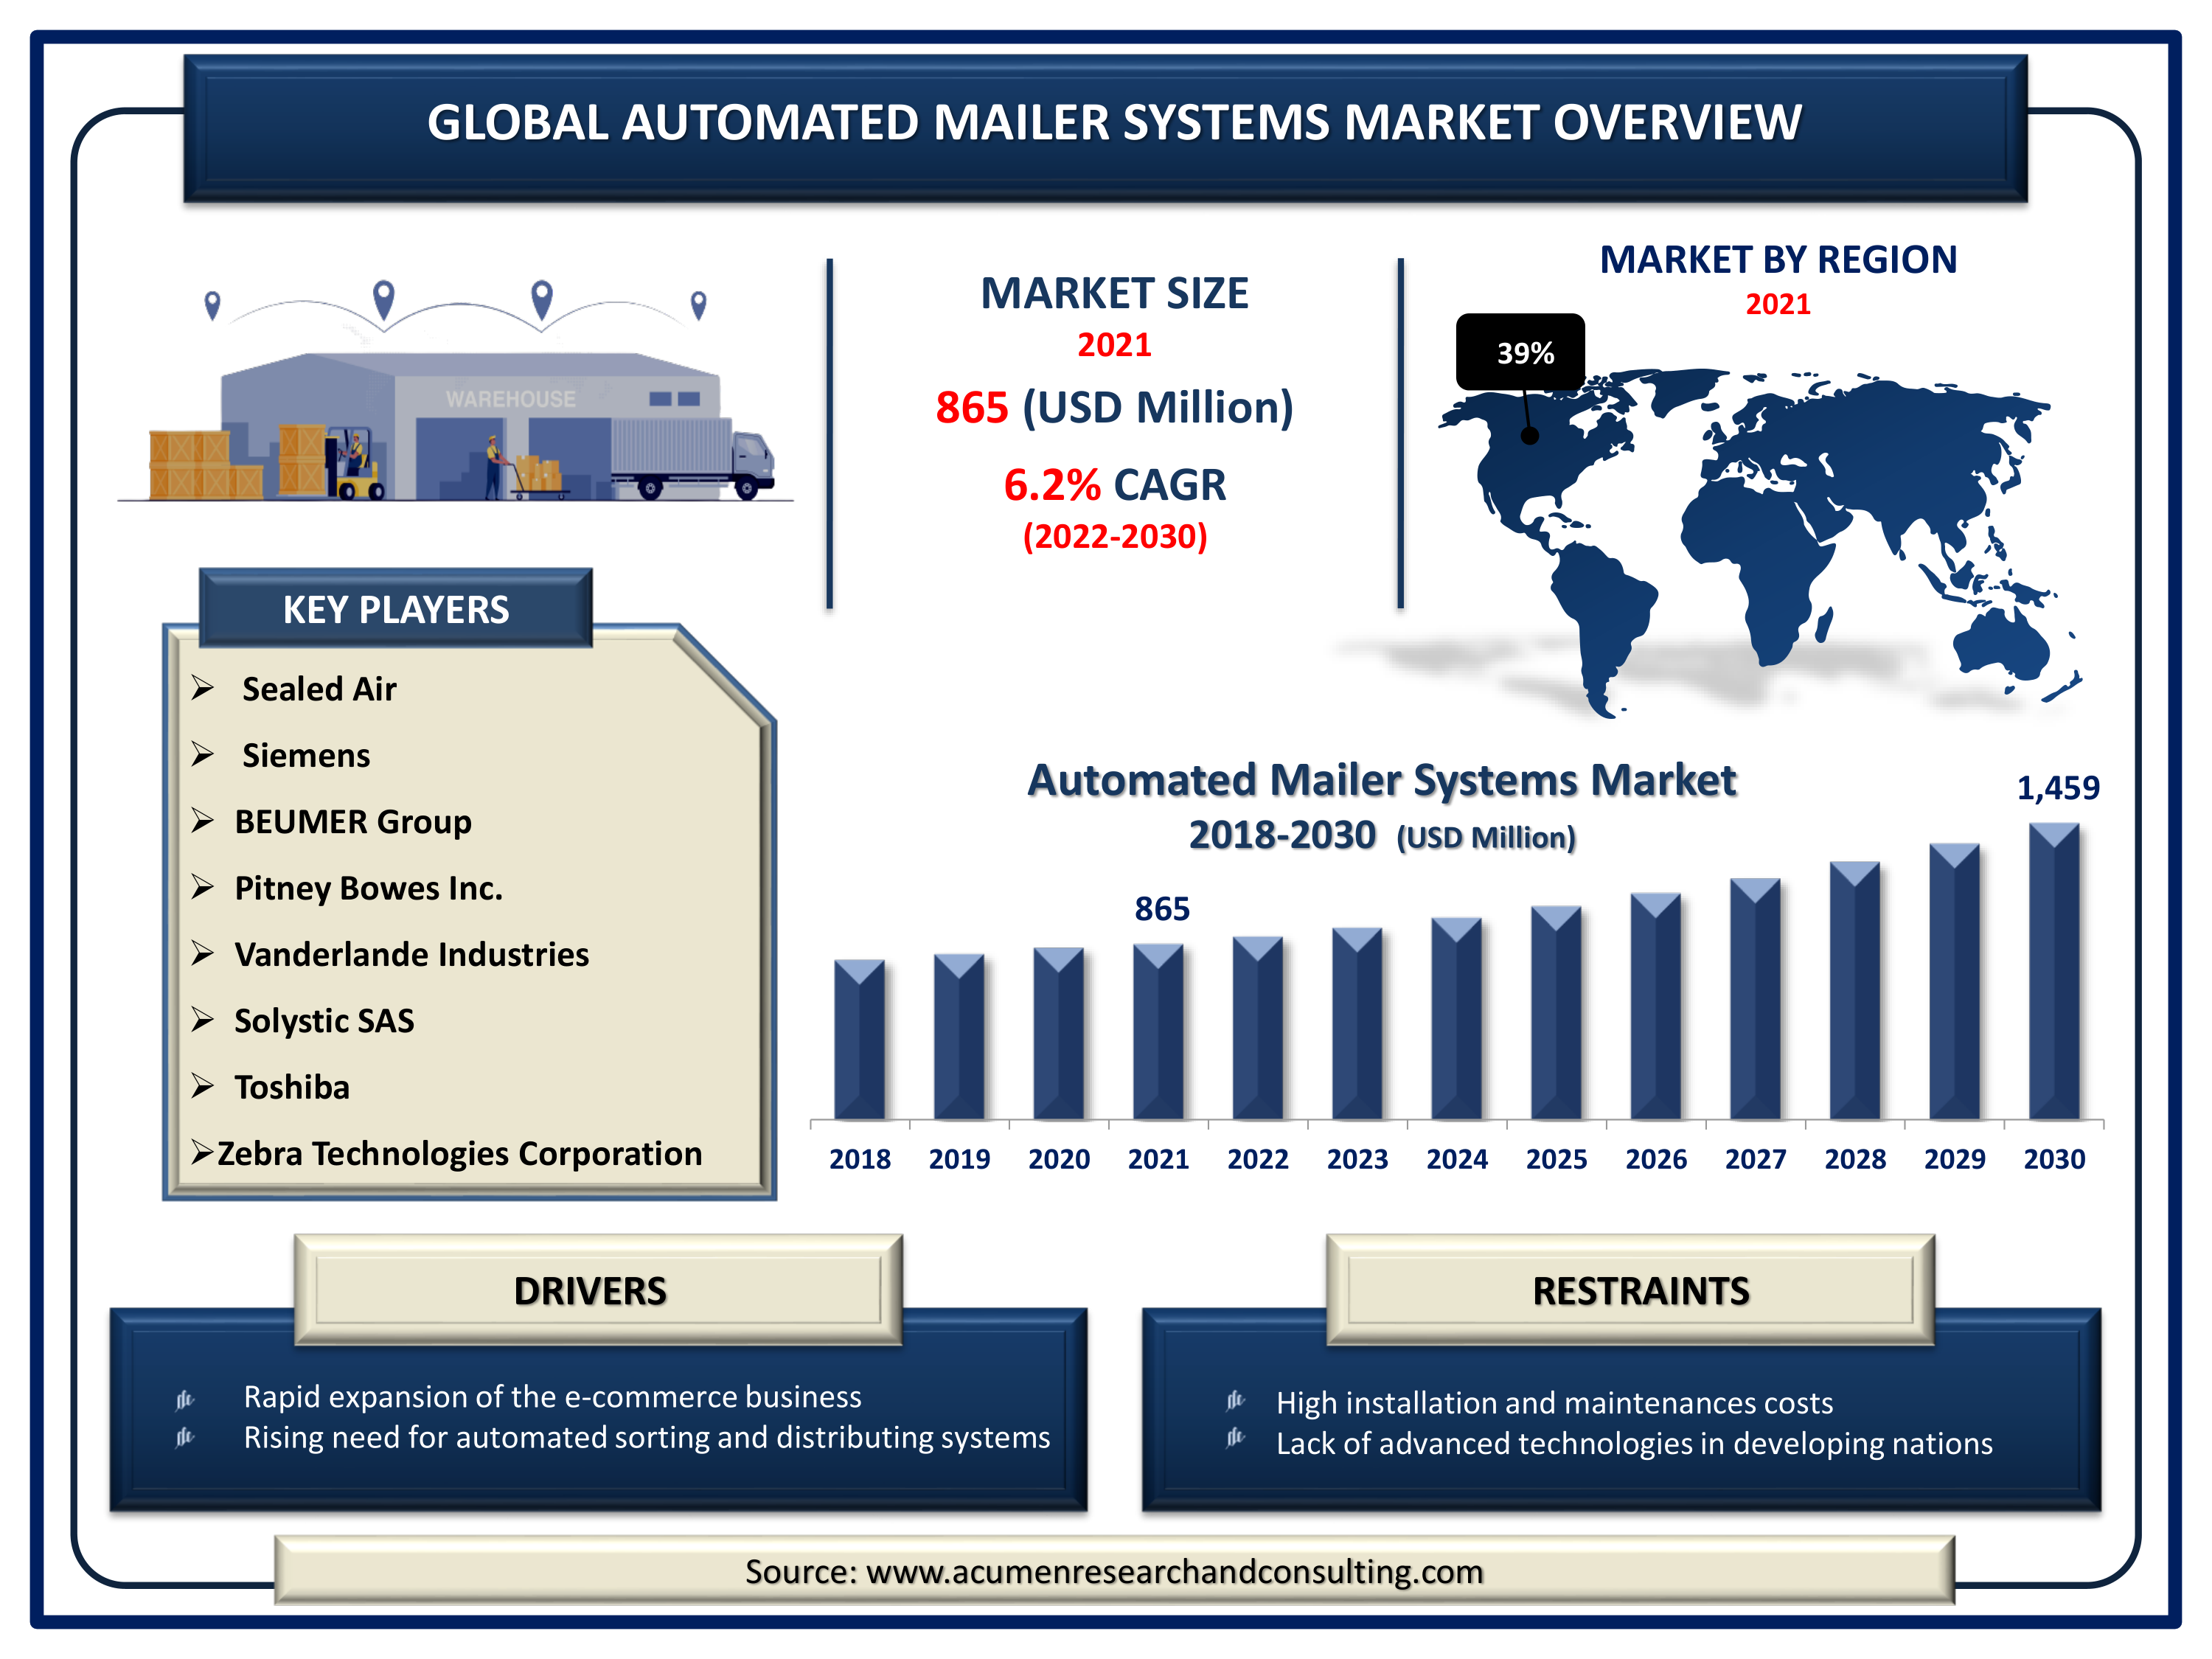 Automated Mailer Systems Market is predicted to be worth USD 1,459 Million by 2030, with a CAGR of 6.2%